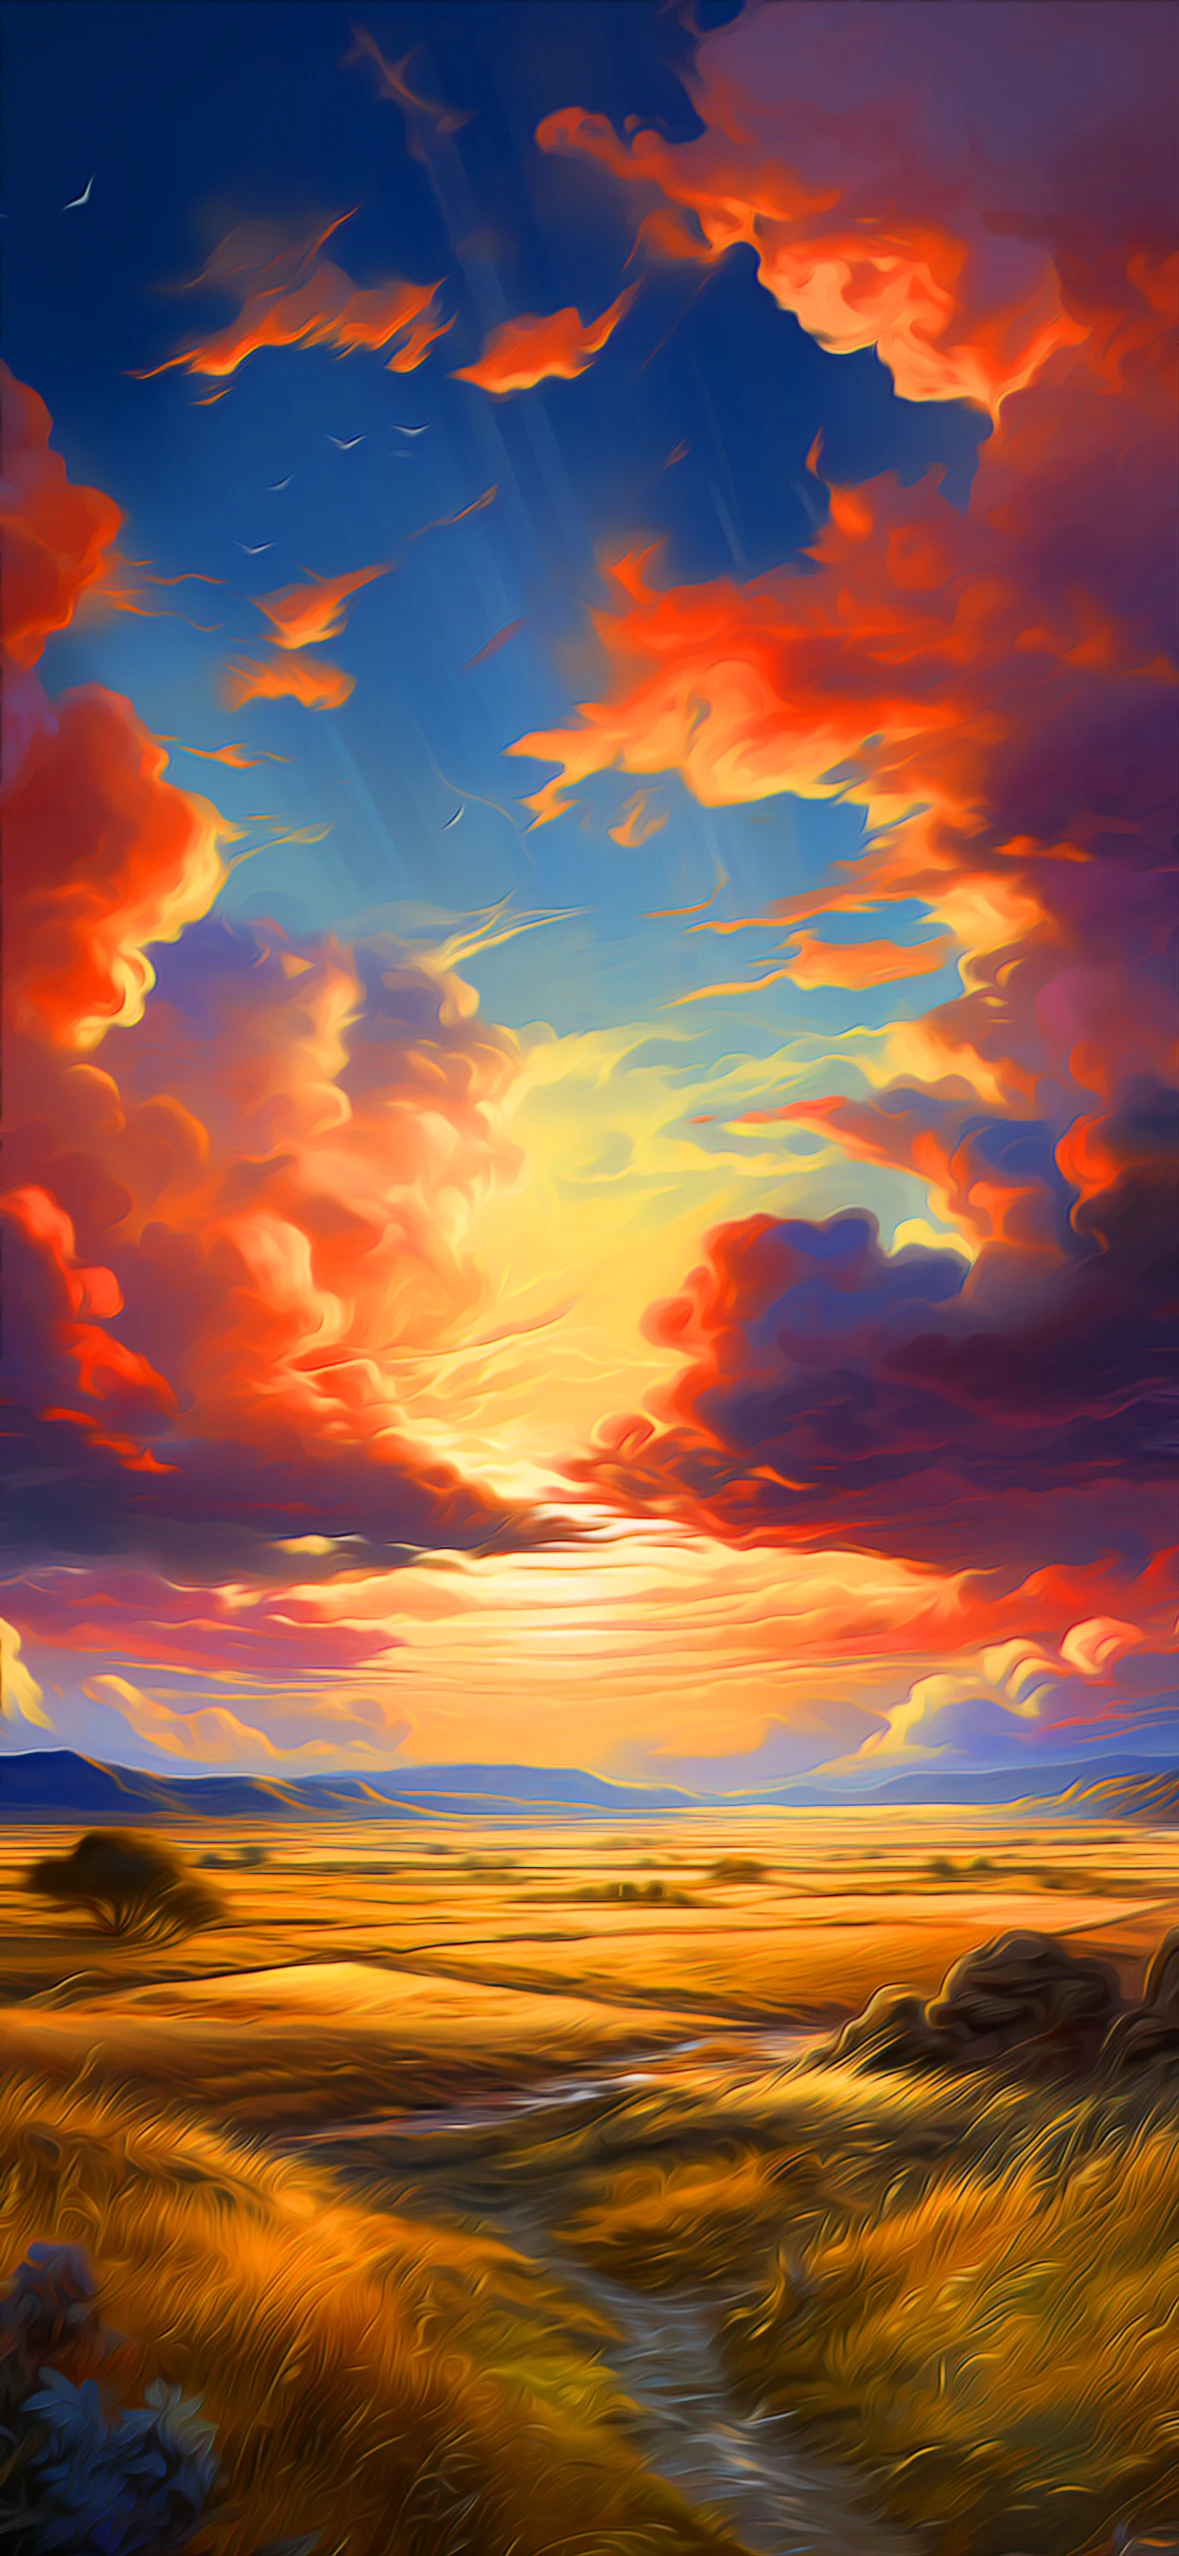 Dramatic oil-painting style image of a sunset with fiery clouds over a tranquil field, evoking a sense of peace and grandeur.